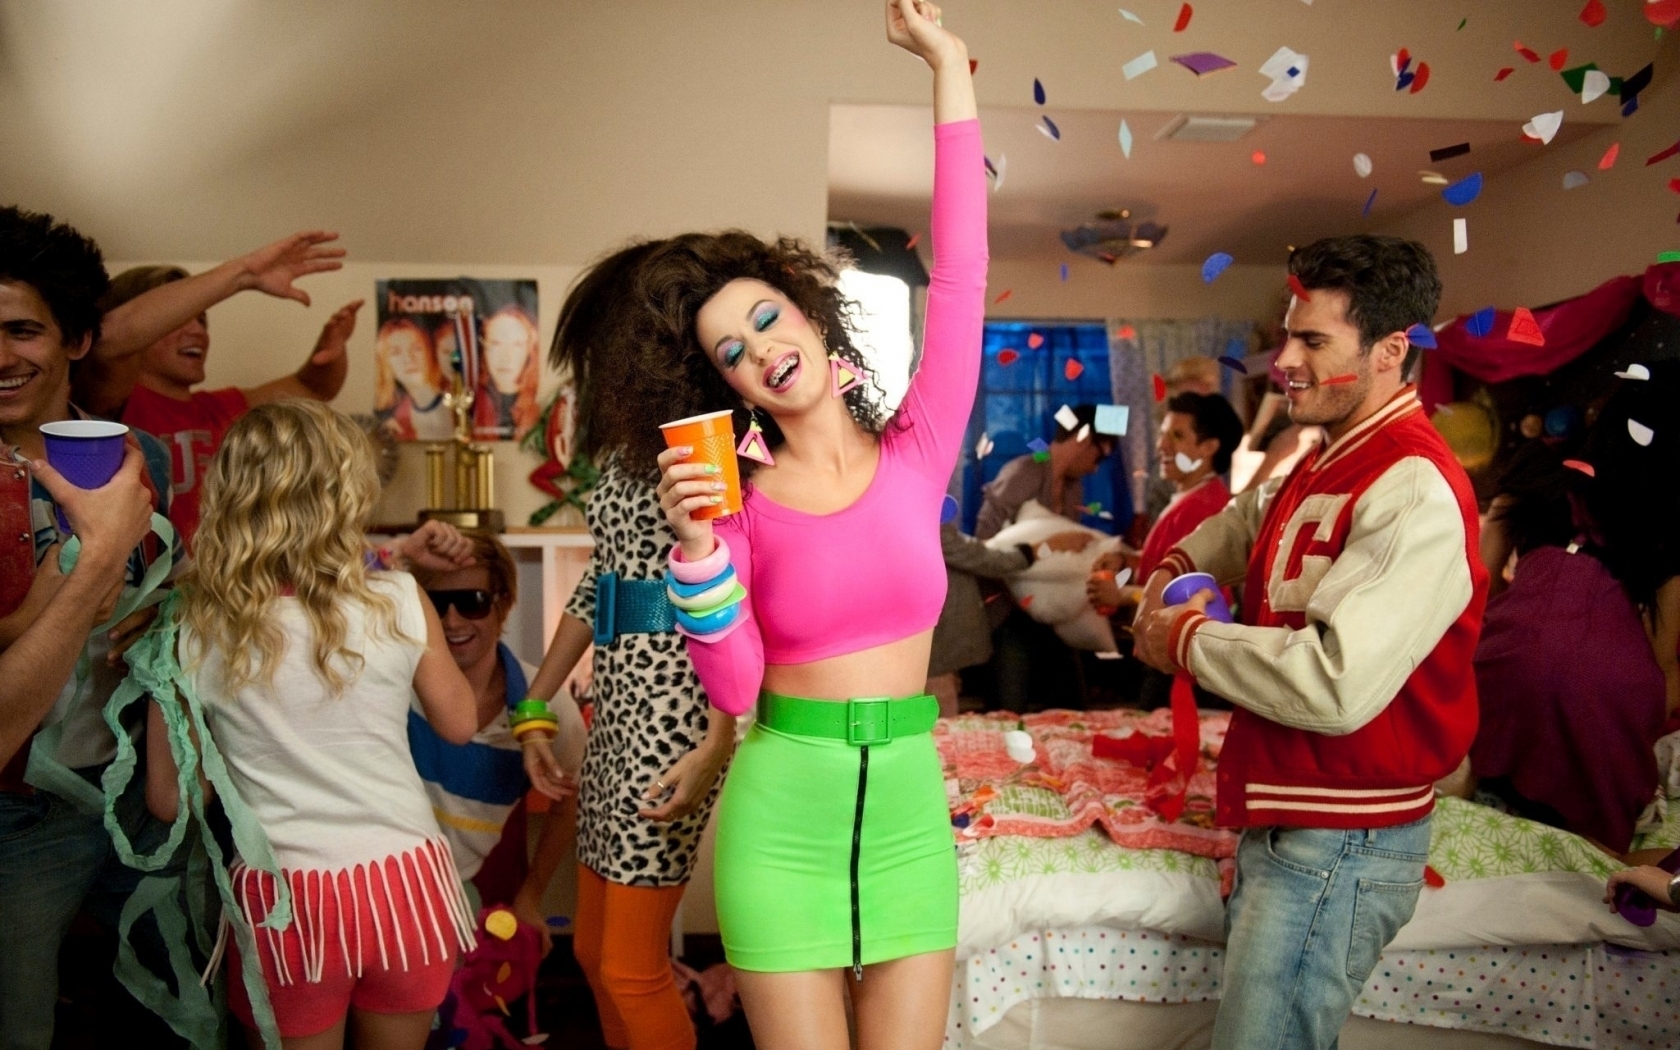 katy_perry_last_friday_night_video_young_party_dance_company_joy_54442_1680x1050